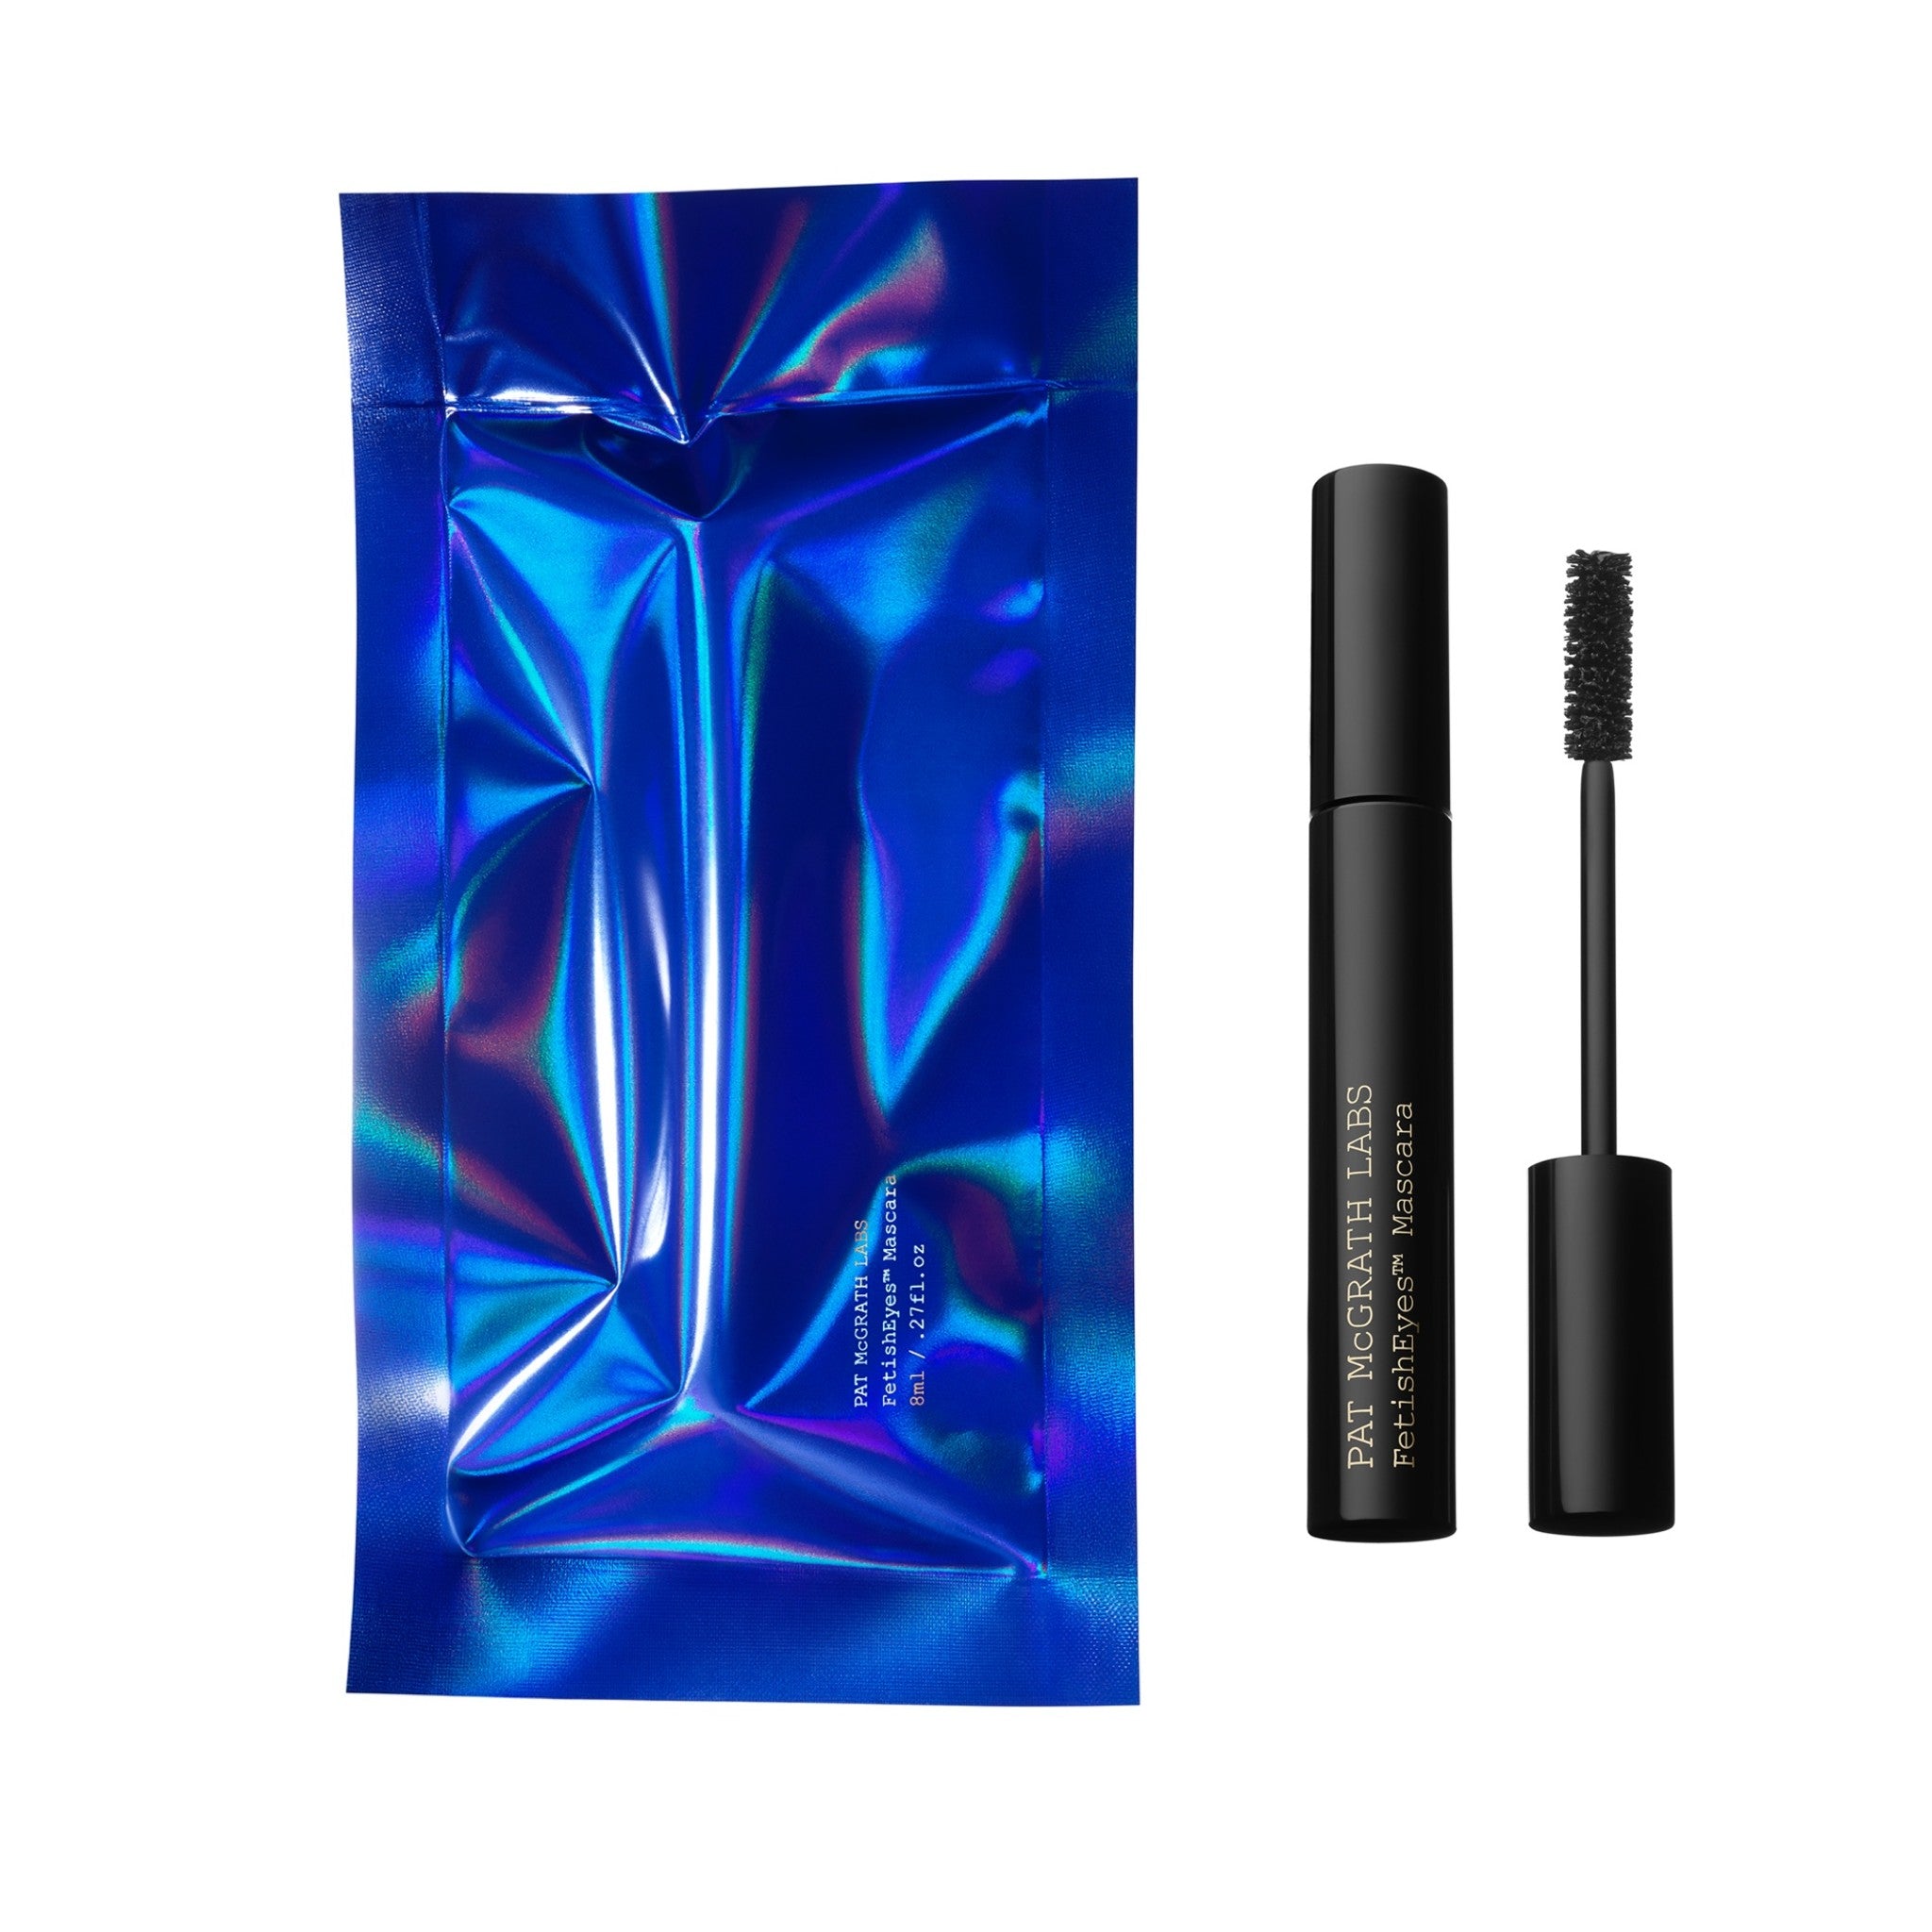 Pat McGrath Labs FetishEyes Mascara main image. This product is in the color black